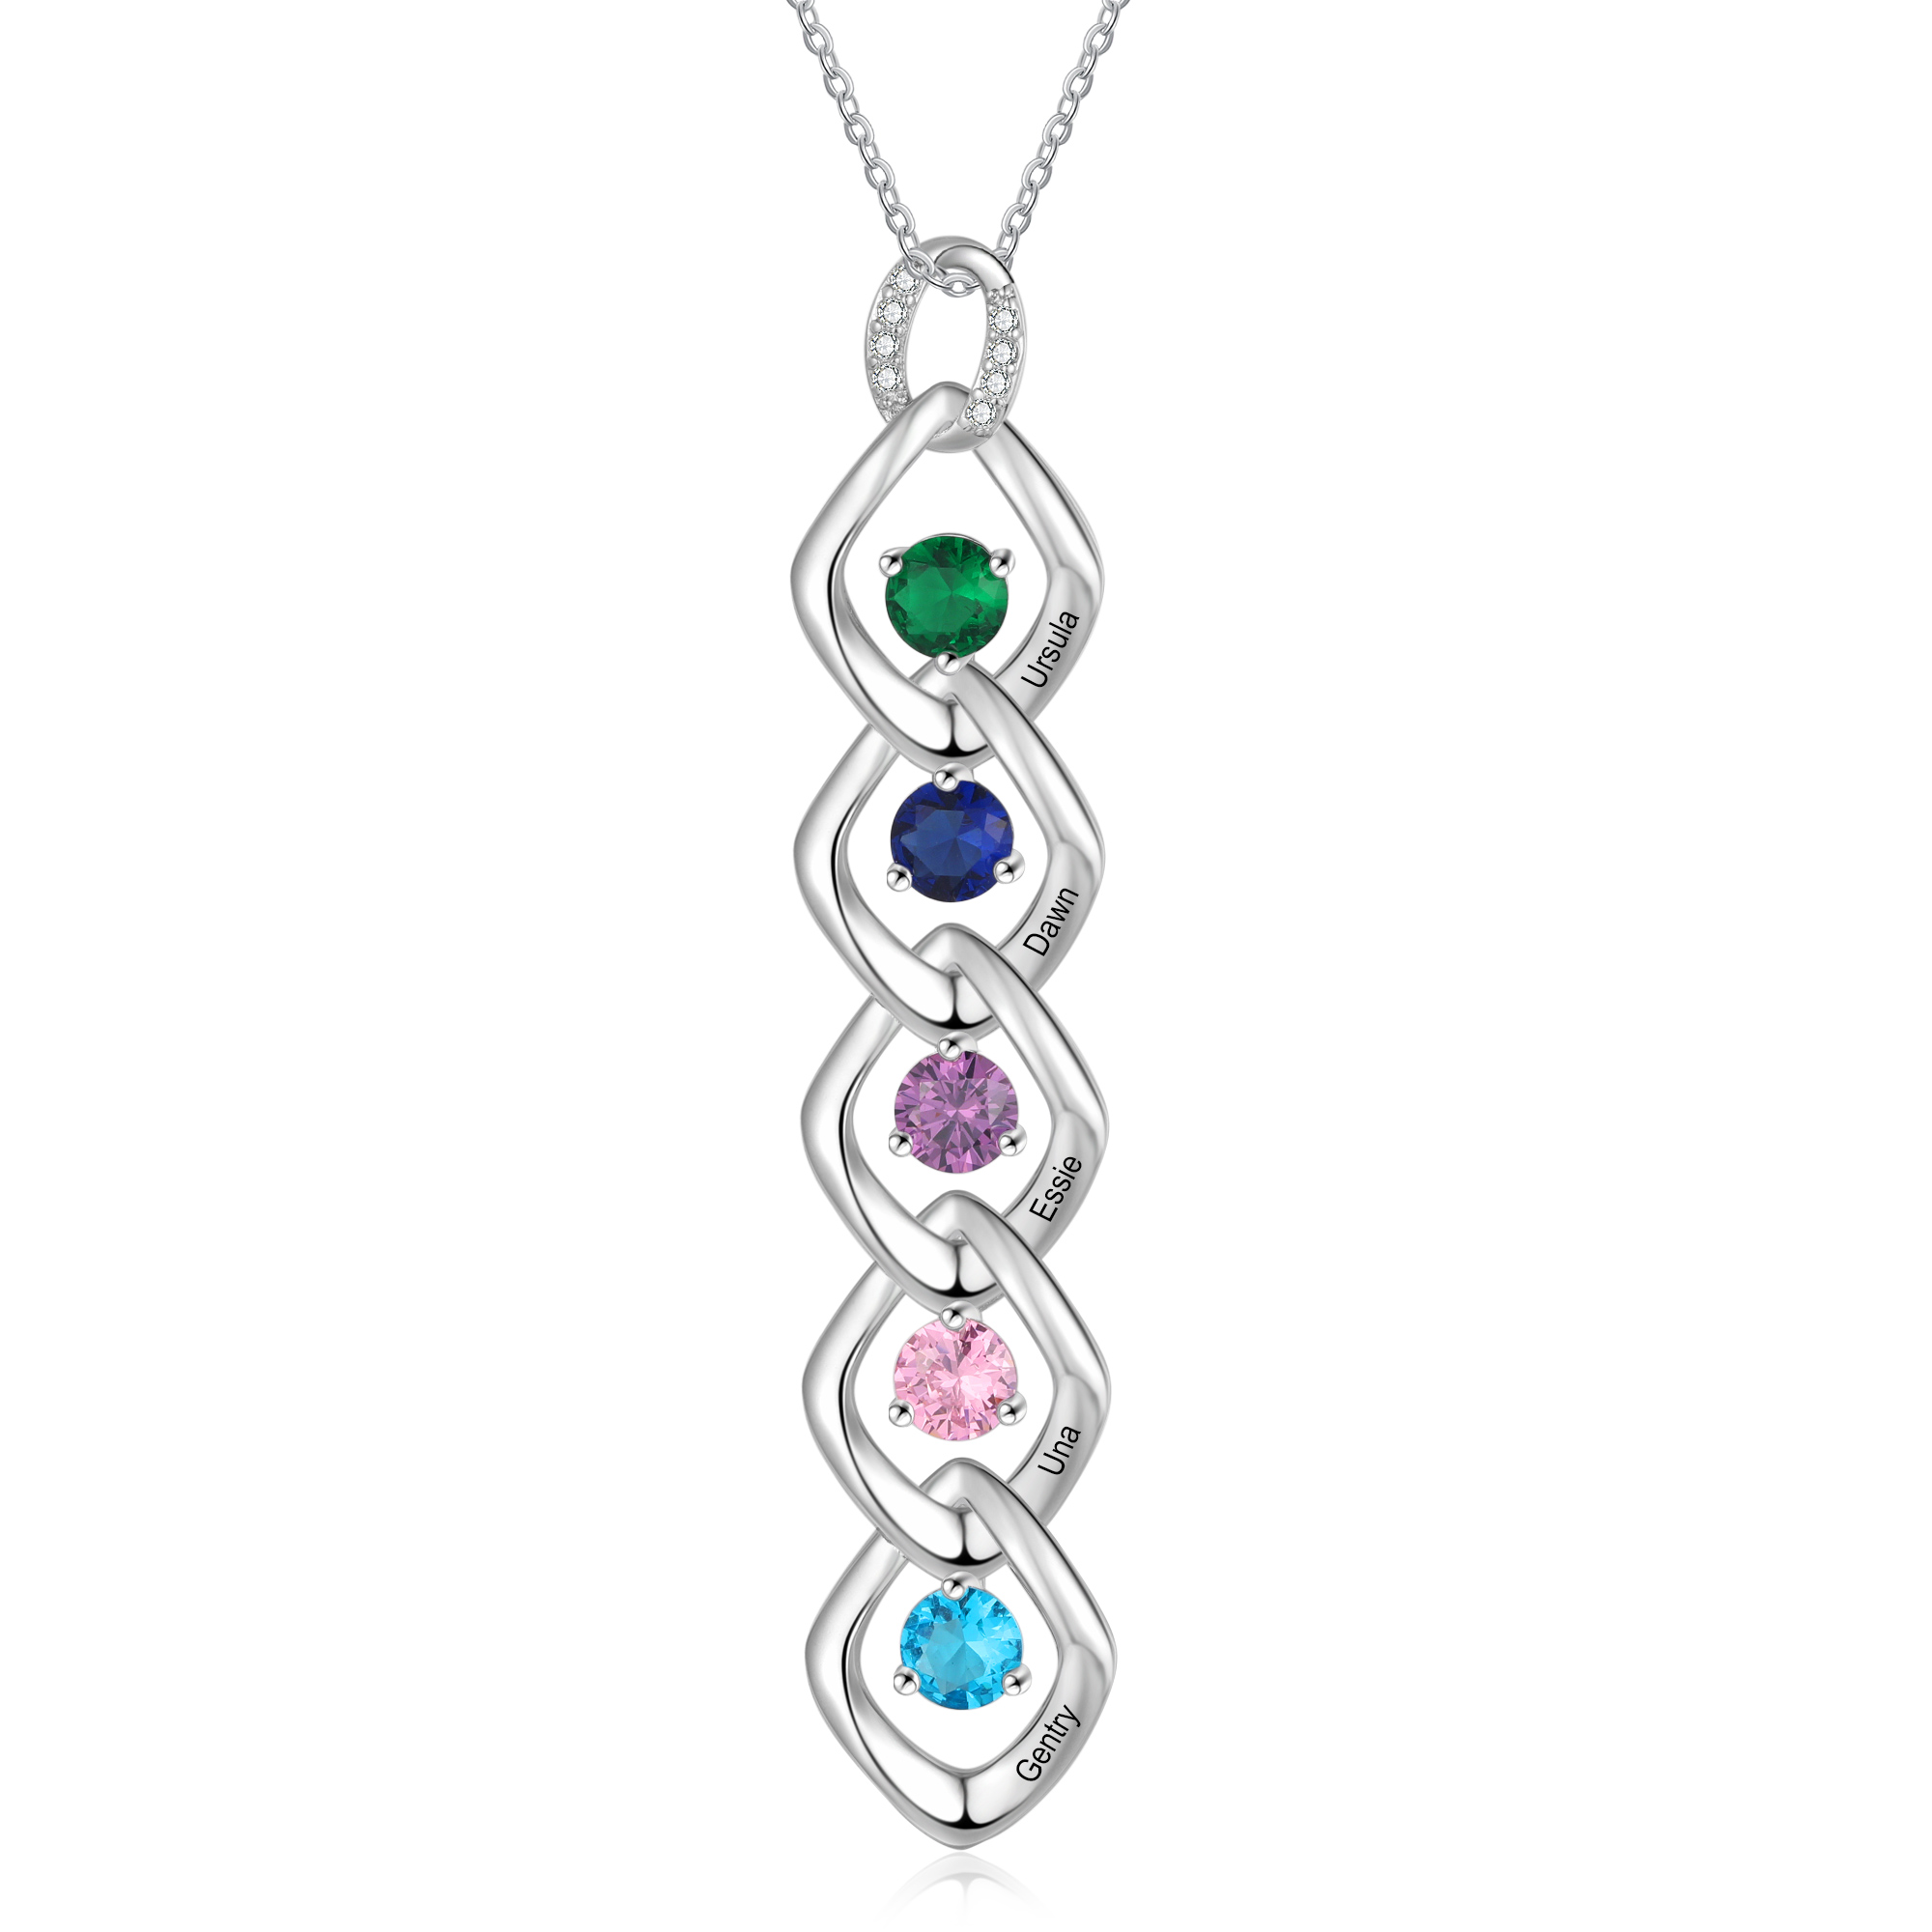 5 Names - Personalized Birthstone Necklace With Name Engraved For A Sp